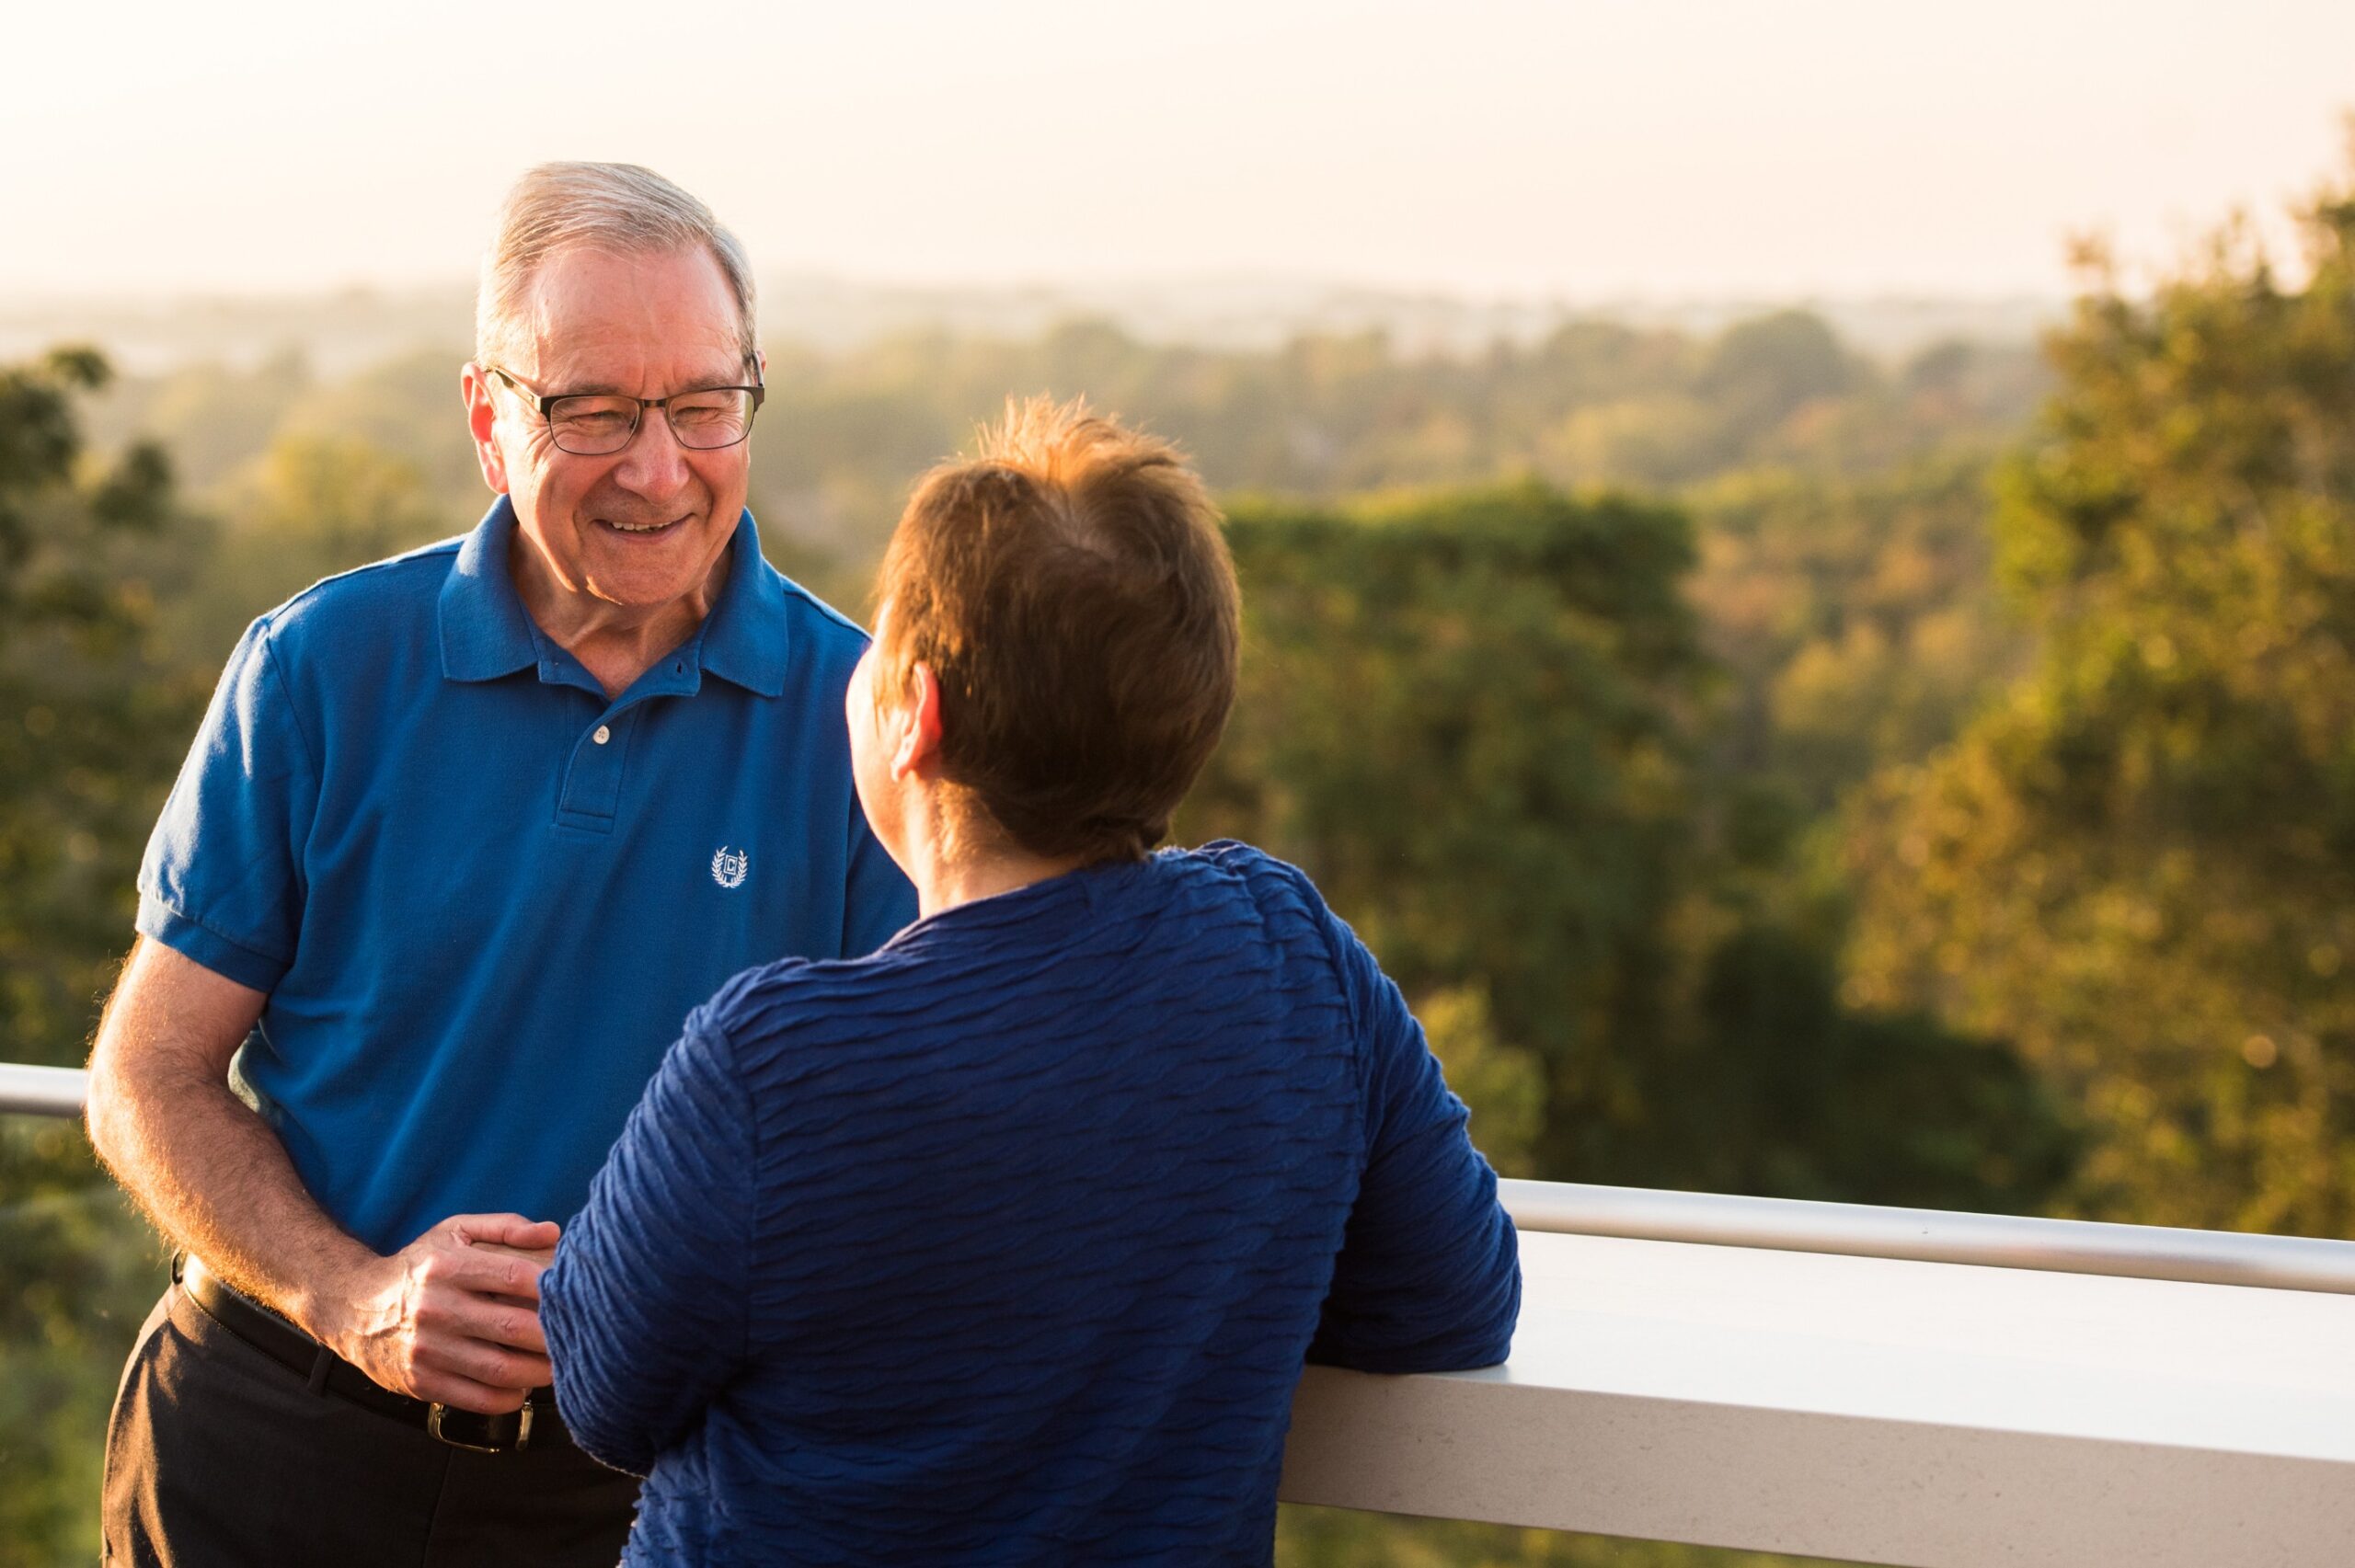 An older couple engaged in independent living talk on a balcony.